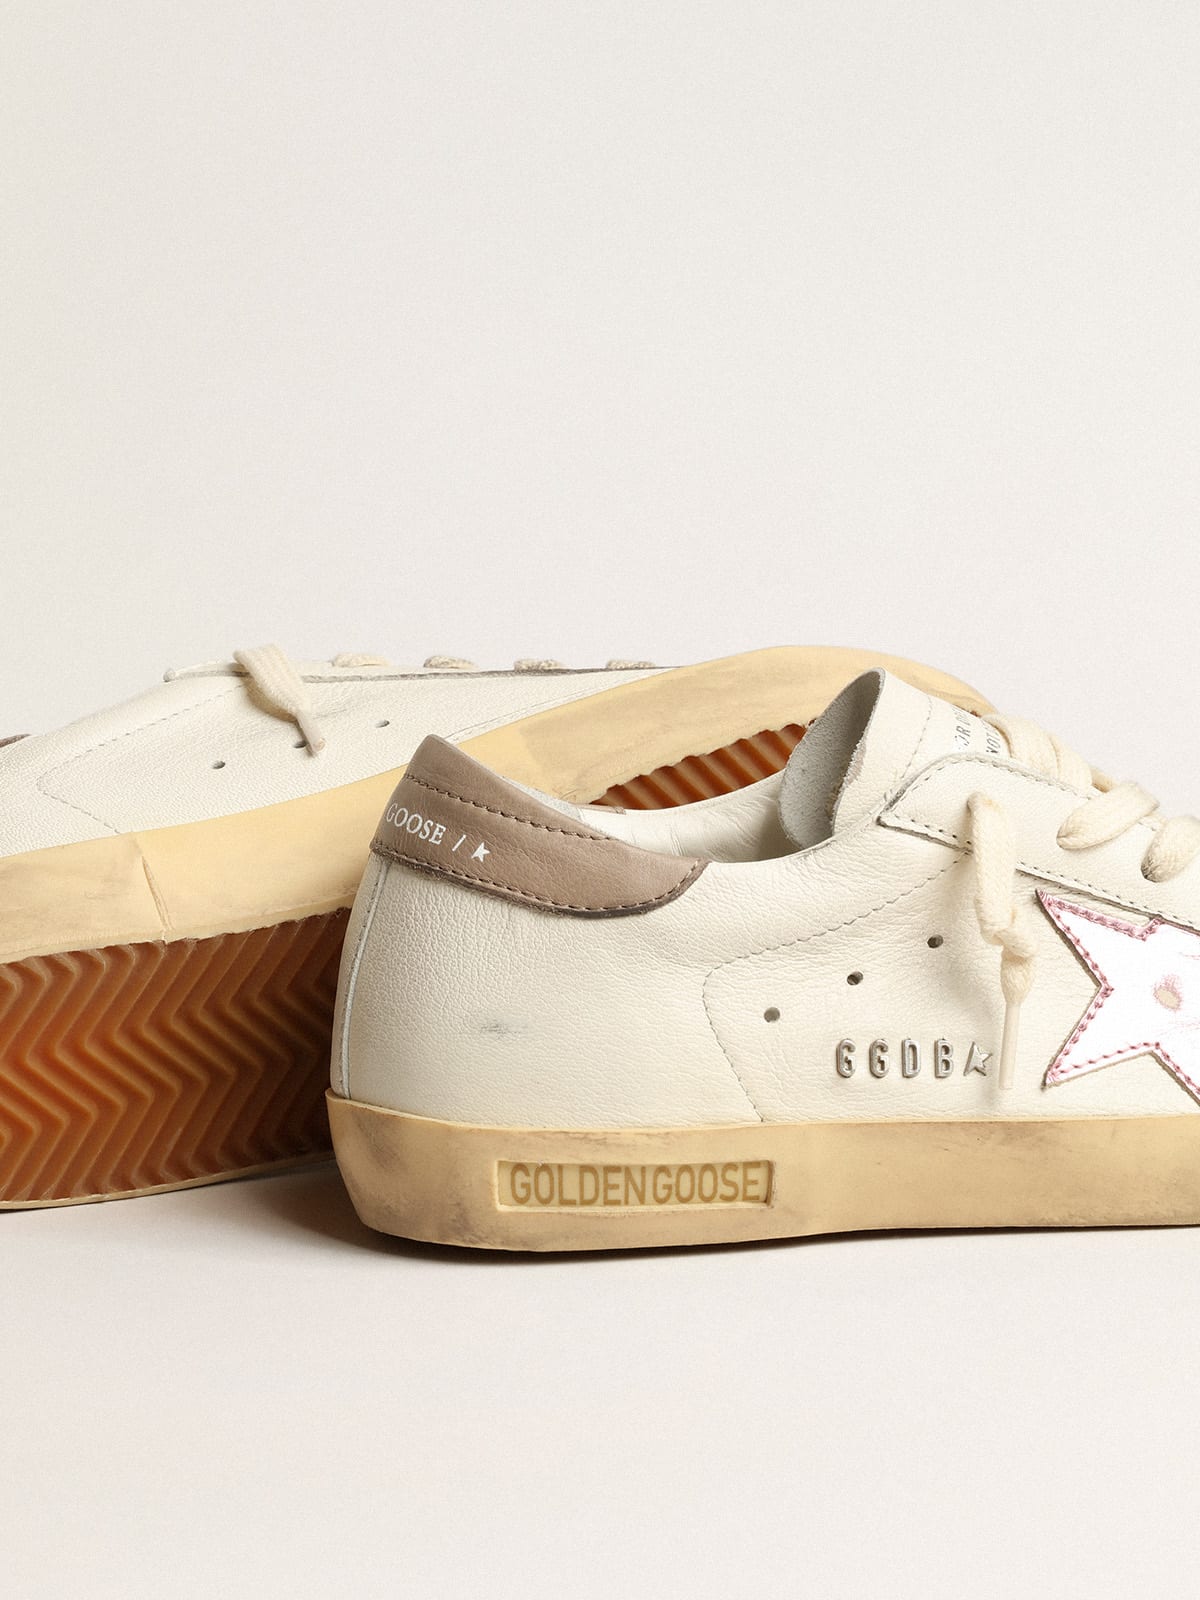 Golden Goose - Super-Star in white nappa with pink metallic leather star in 